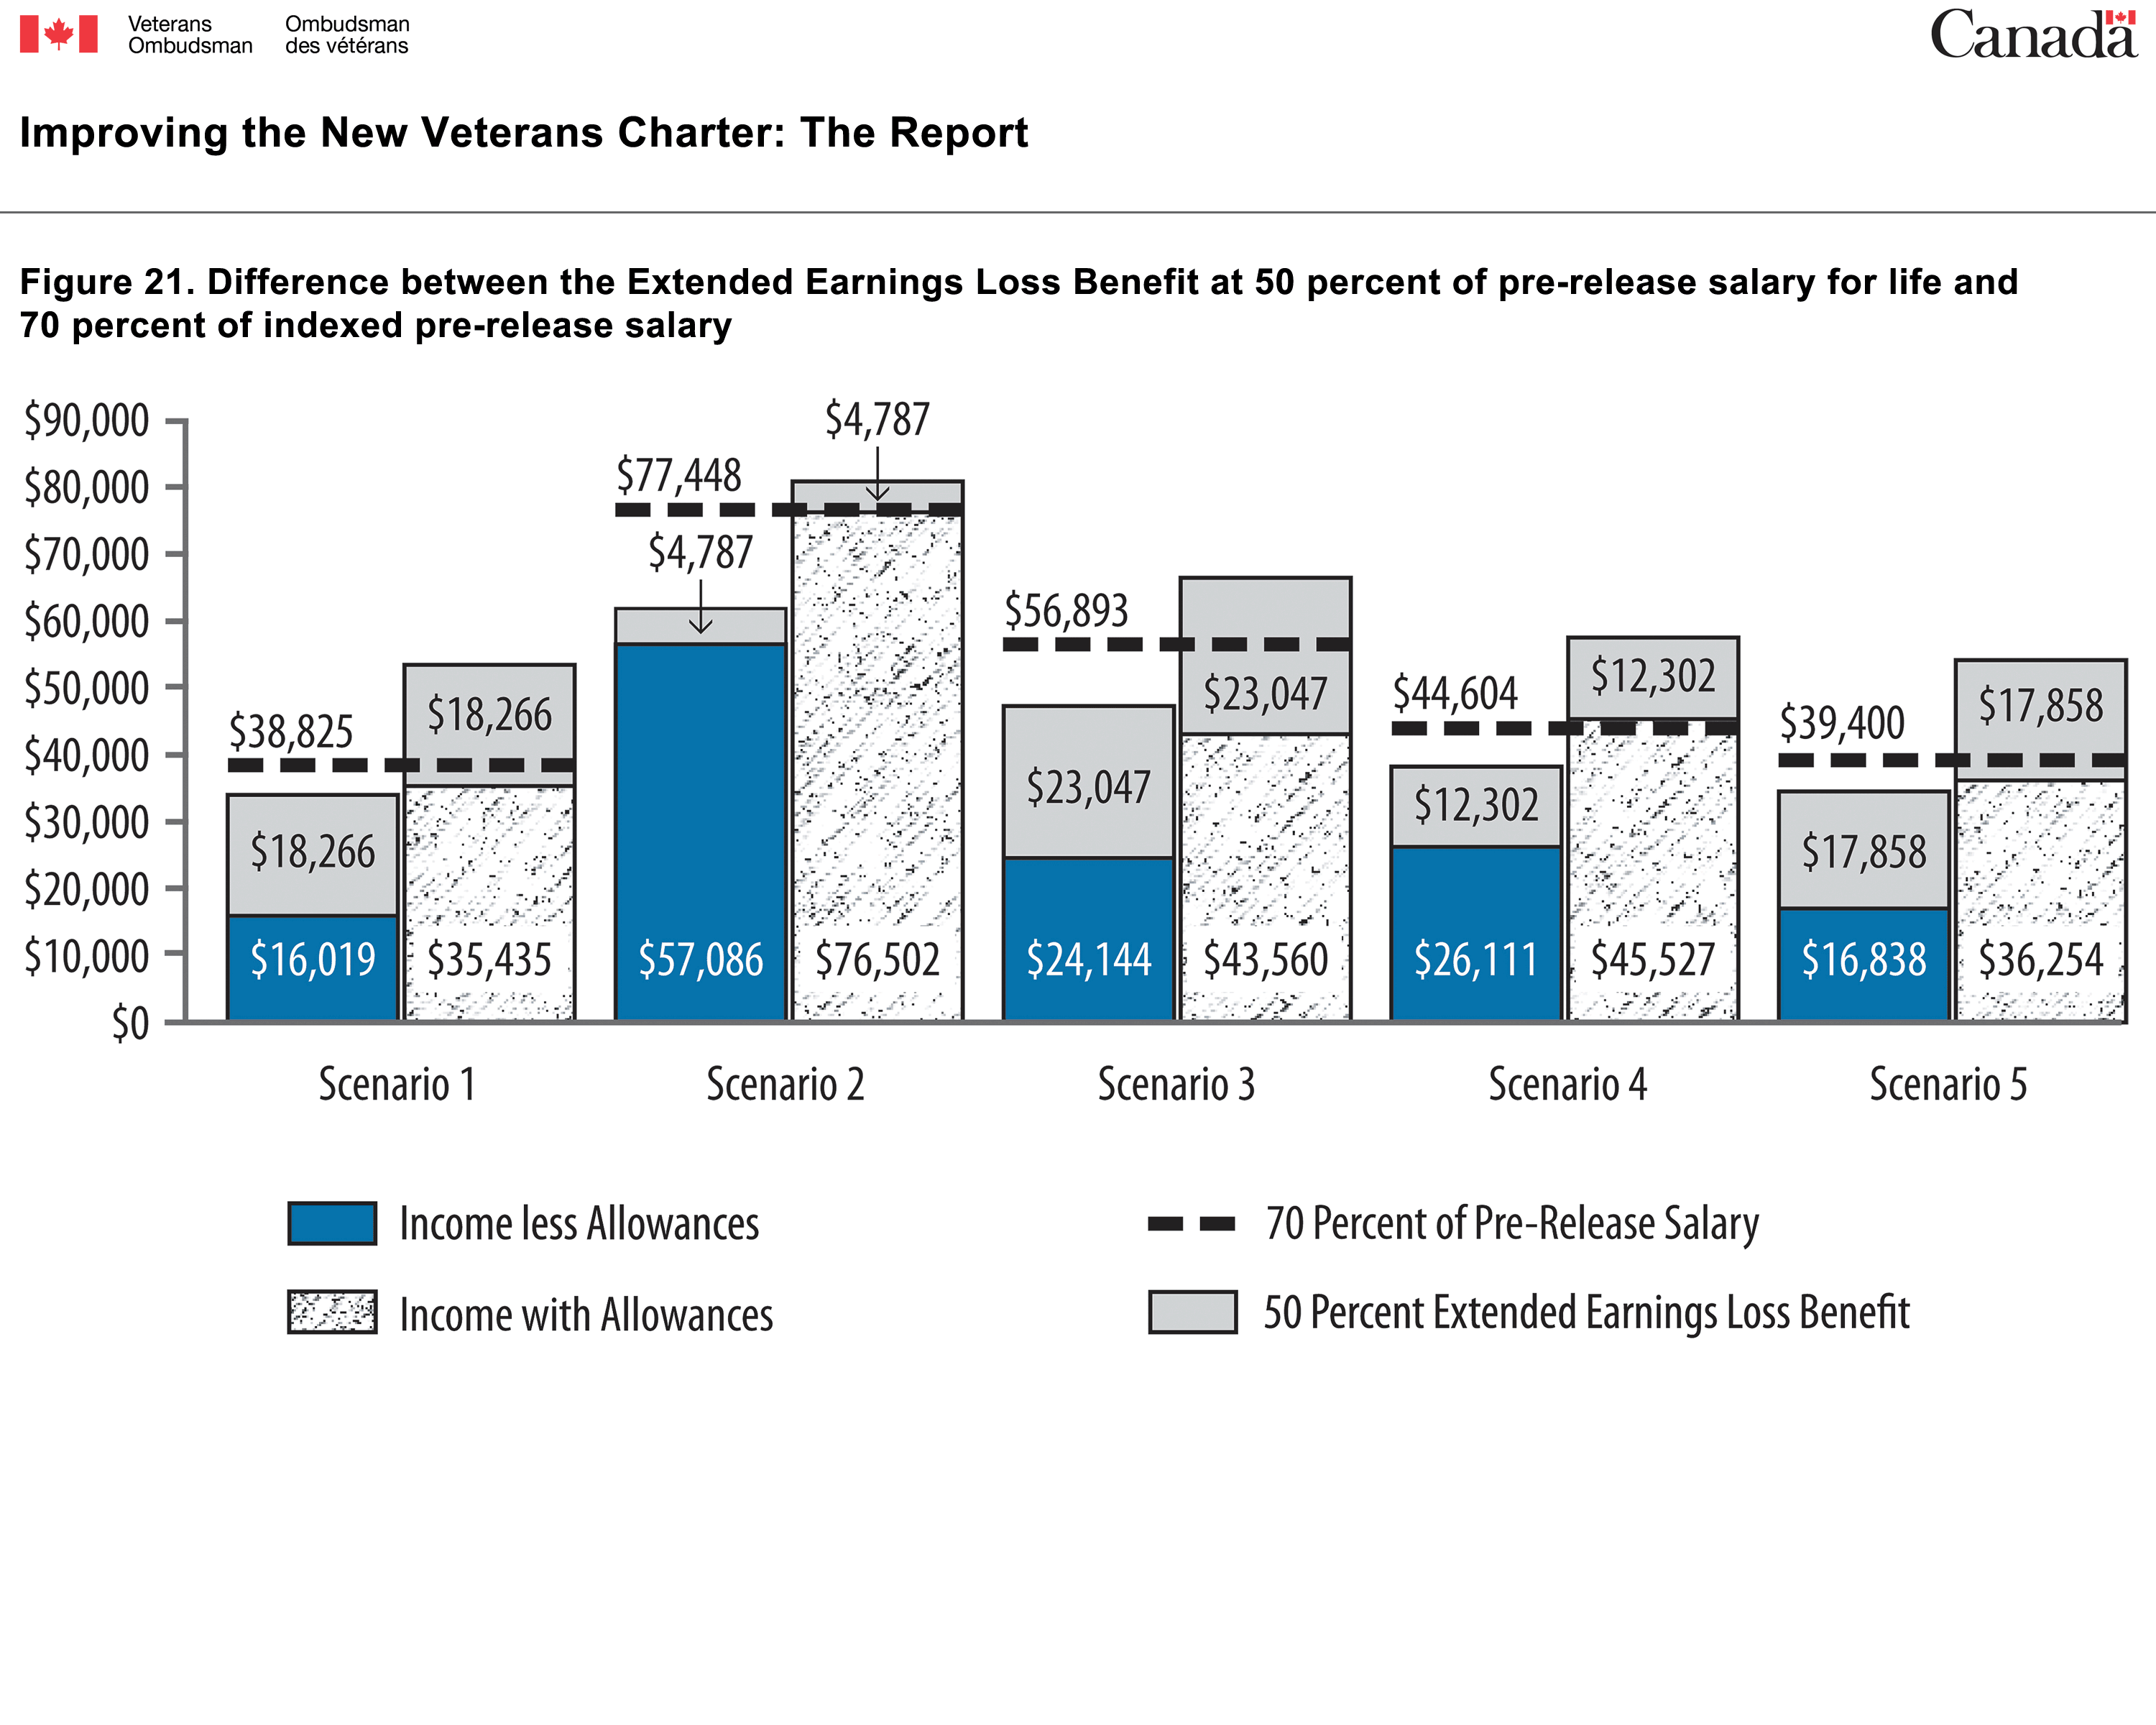 Figure 21. Difference between the Extended Earnings Loss Benefit at 50 percent of pre-release salary for life and 70 percent of indexed pre-release salary